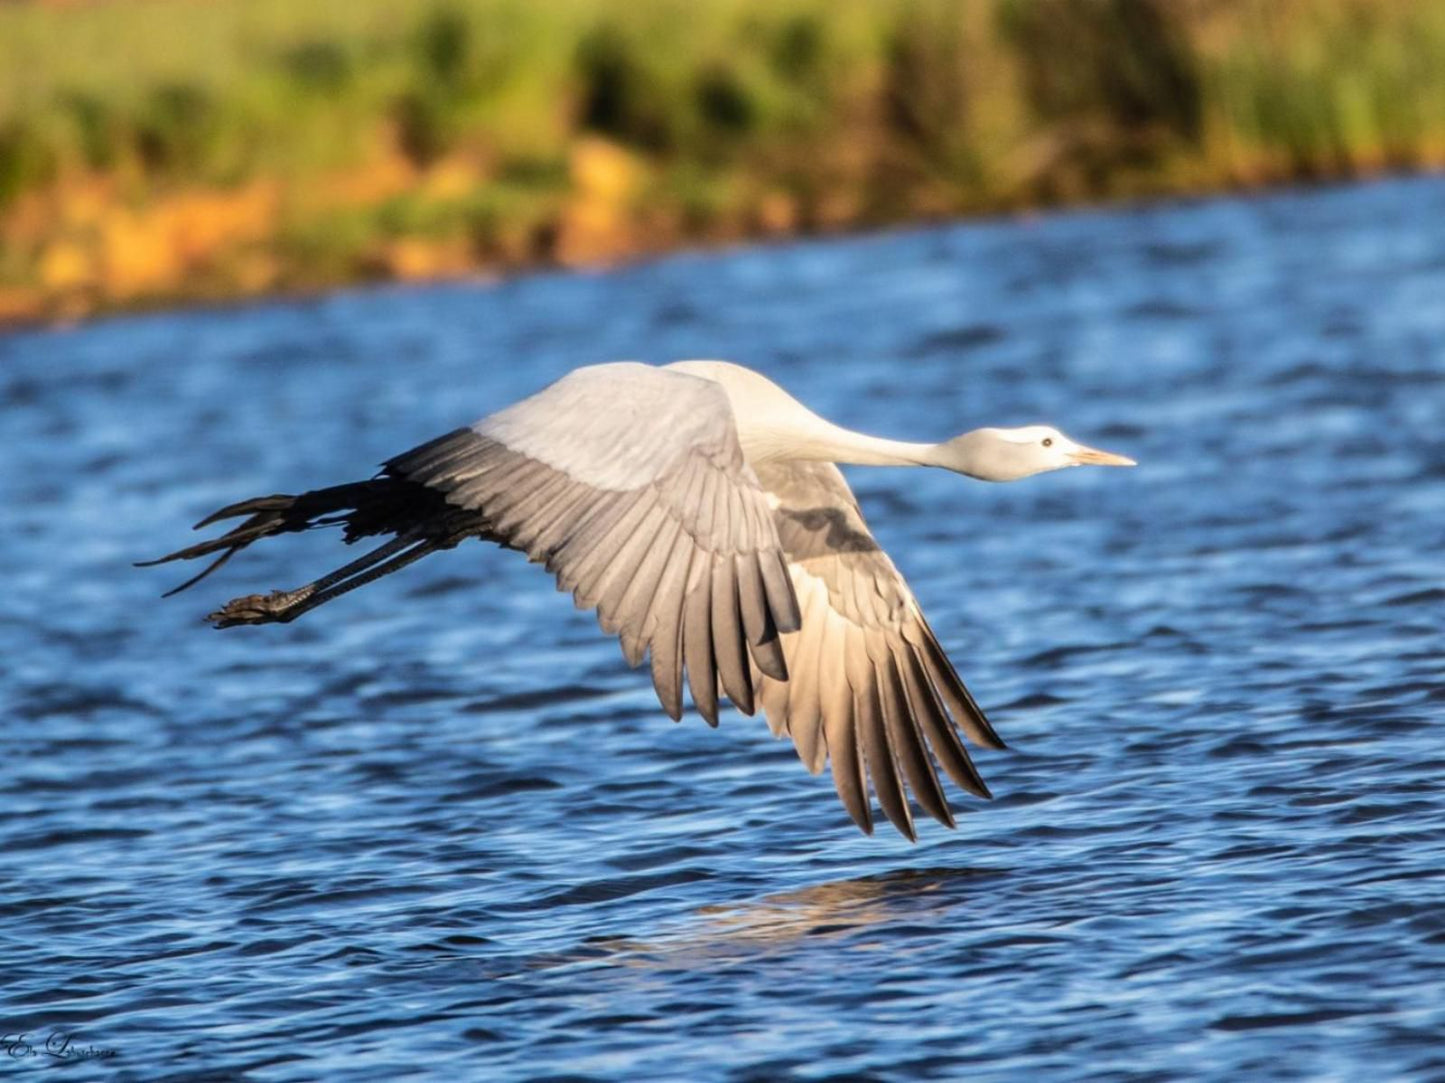 Blue Crane Farm Dullstroom Mpumalanga South Africa Complementary Colors, Seagull, Bird, Animal, Lake, Nature, Waters